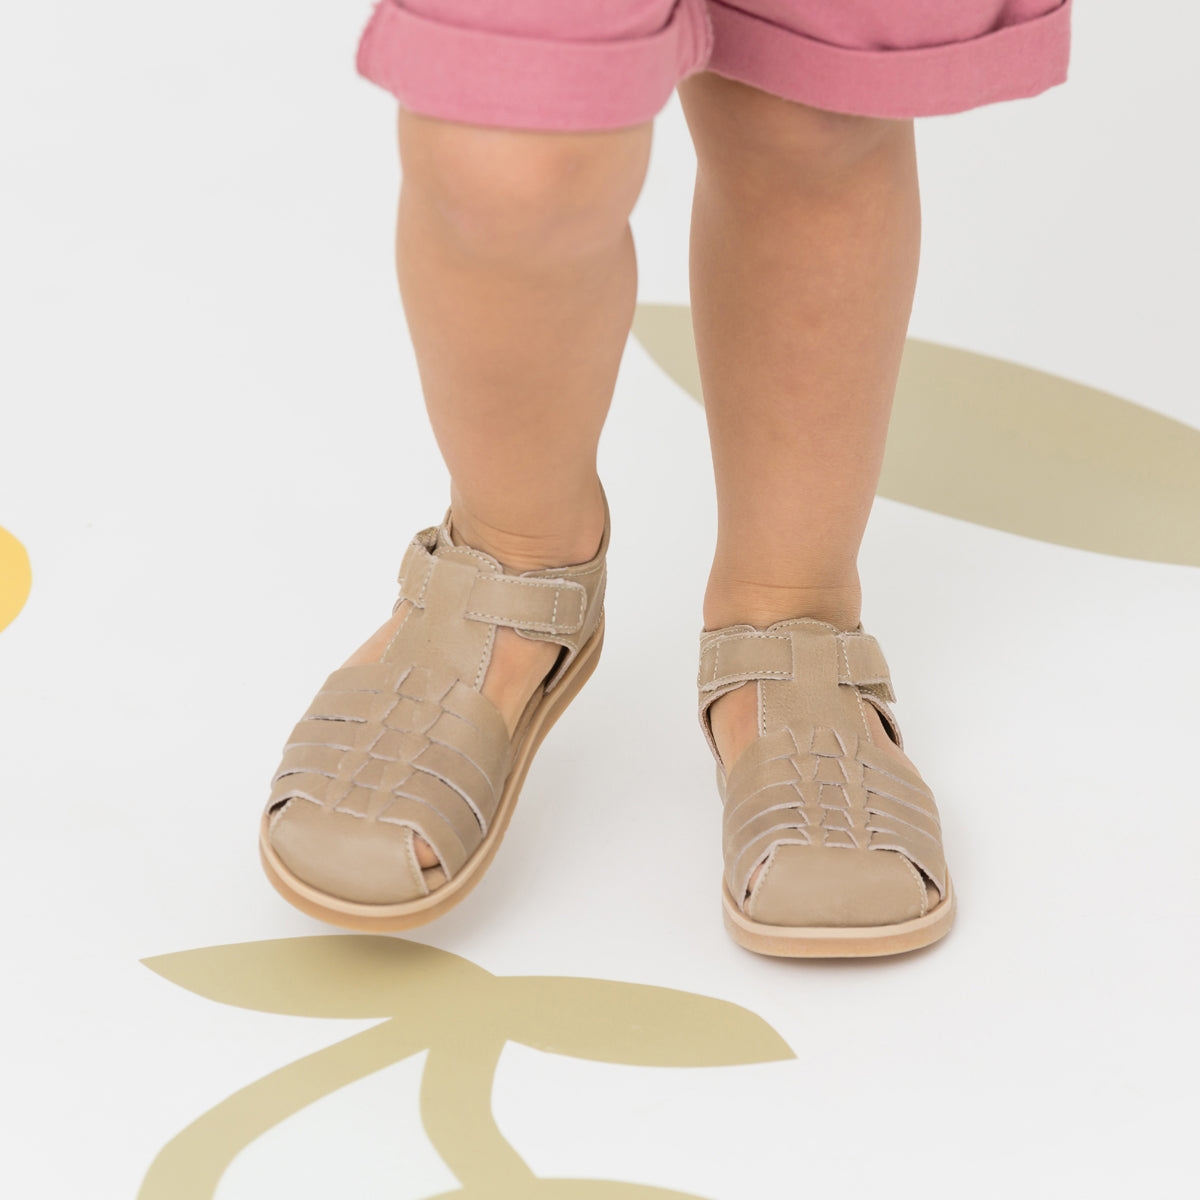 Child wearing Frankie sandals in colour Tan